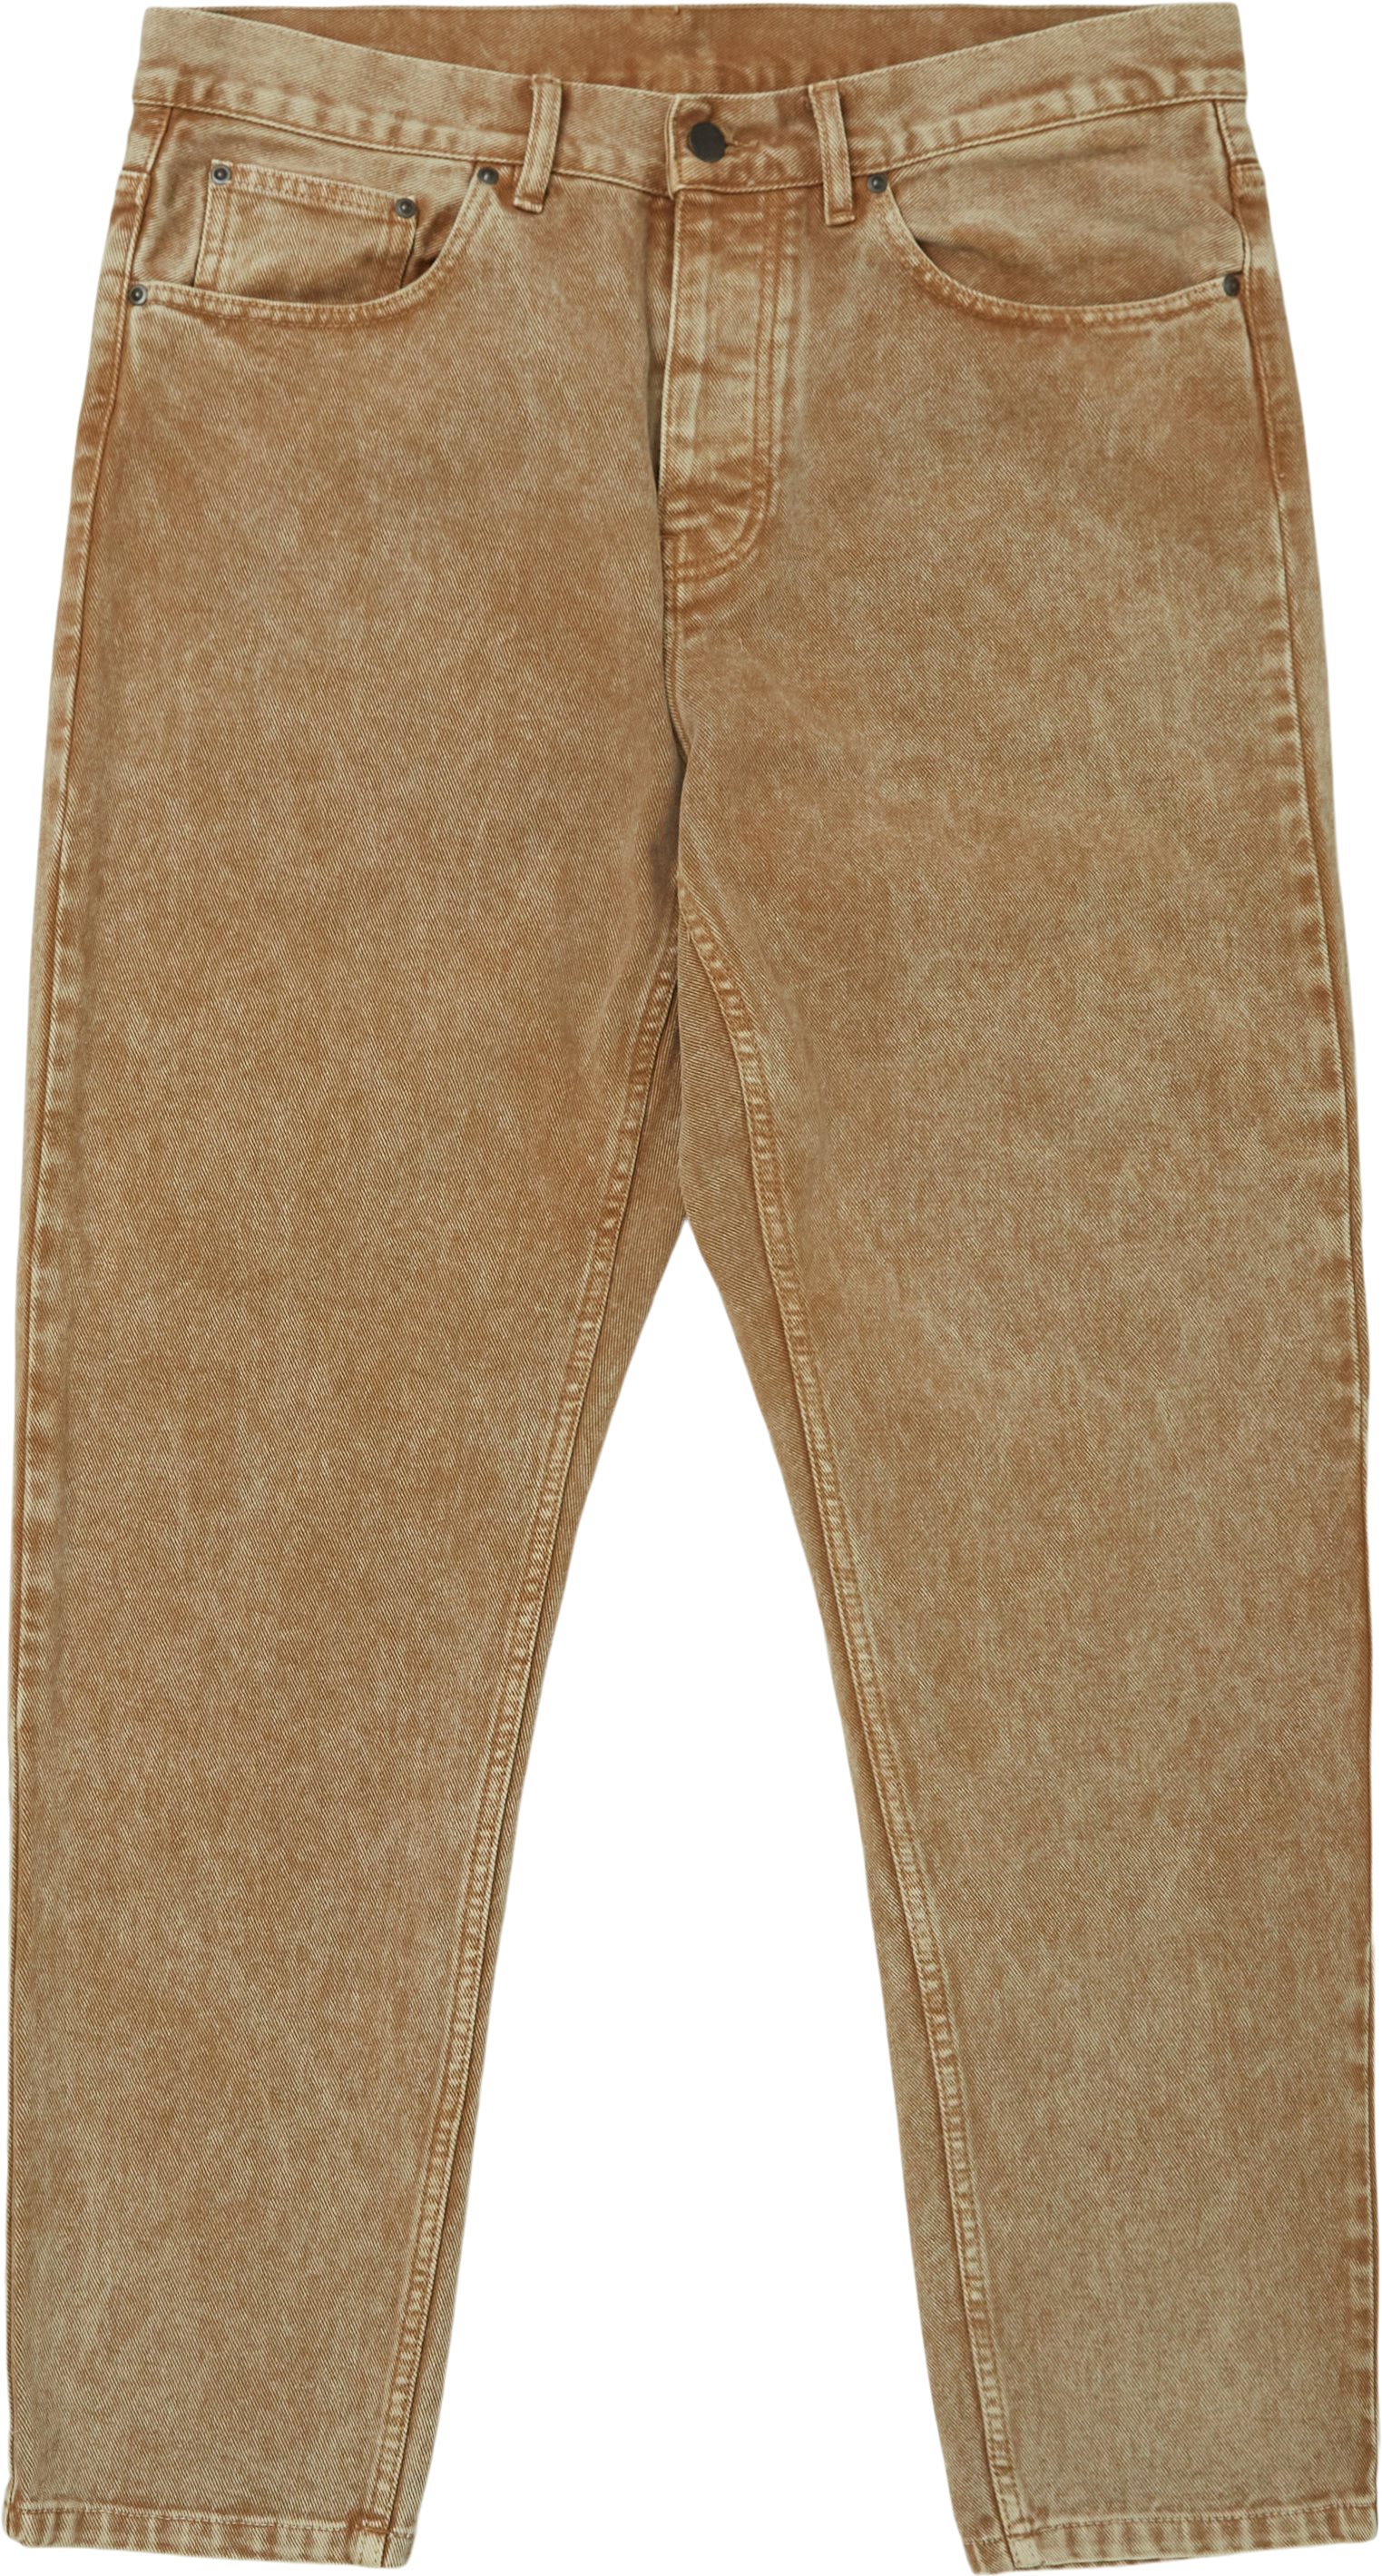 Newel Pant I029148 - Jeans - Relaxed fit - Brun